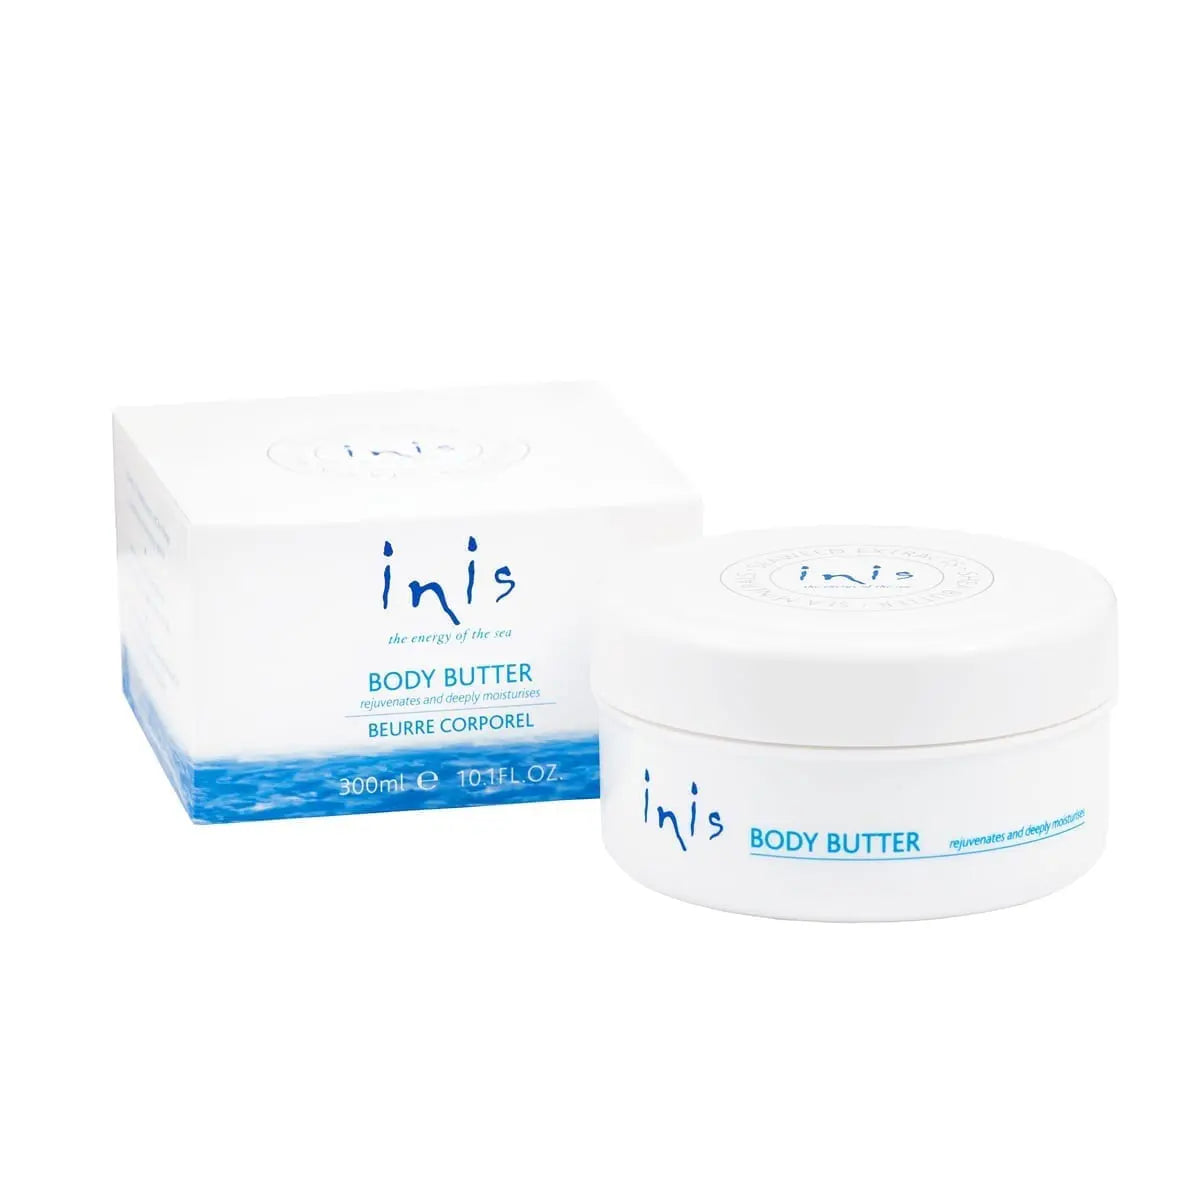 Inis Body Butter 10.1oz